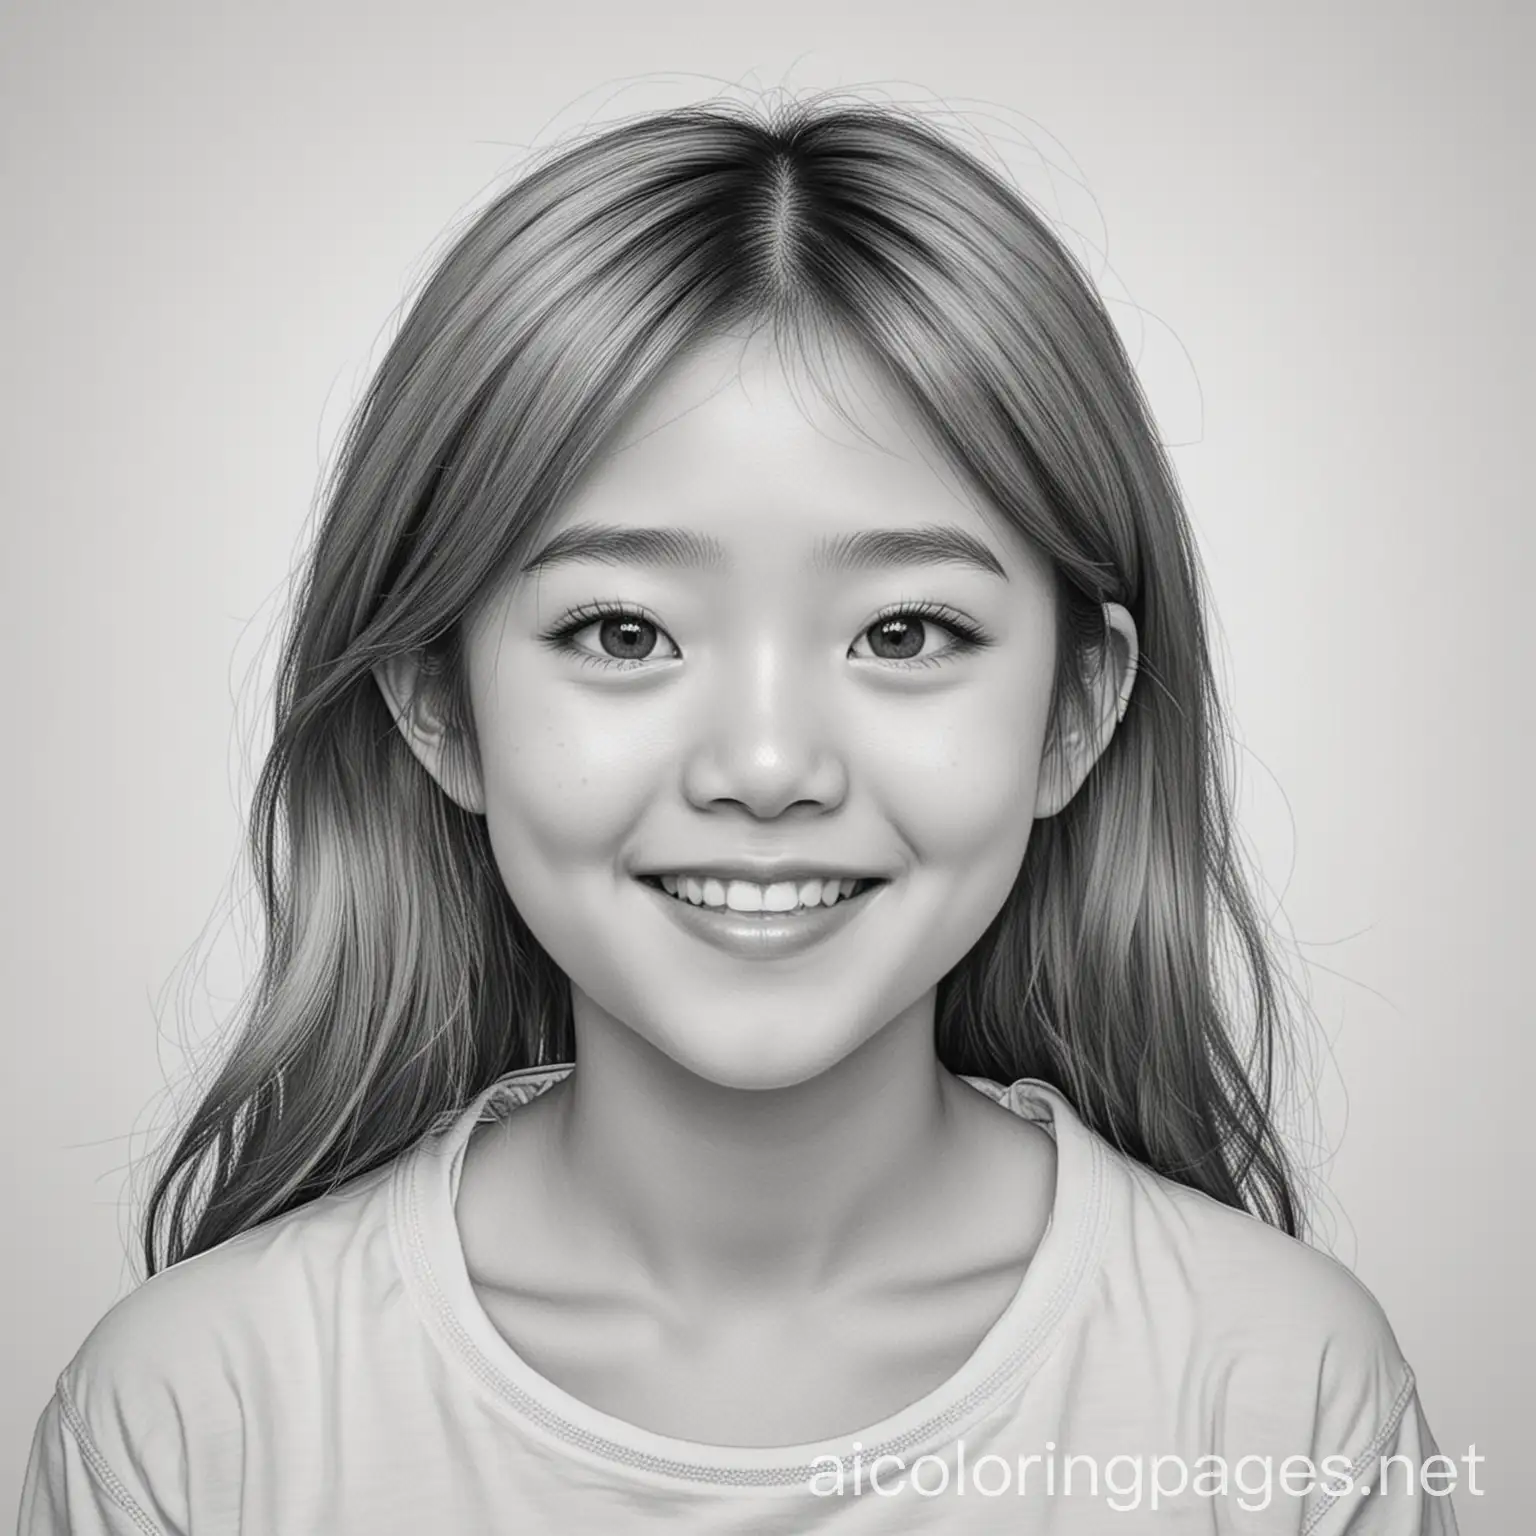 happy  asian realistic teen, Coloring Page, black and white, line art, white background, Simplicity, Ample White Space. The background of the coloring page is plain white to make it easy for young children to color within the lines. The outlines of all the subjects are easy to distinguish, making it simple for kids to color without too much difficulty